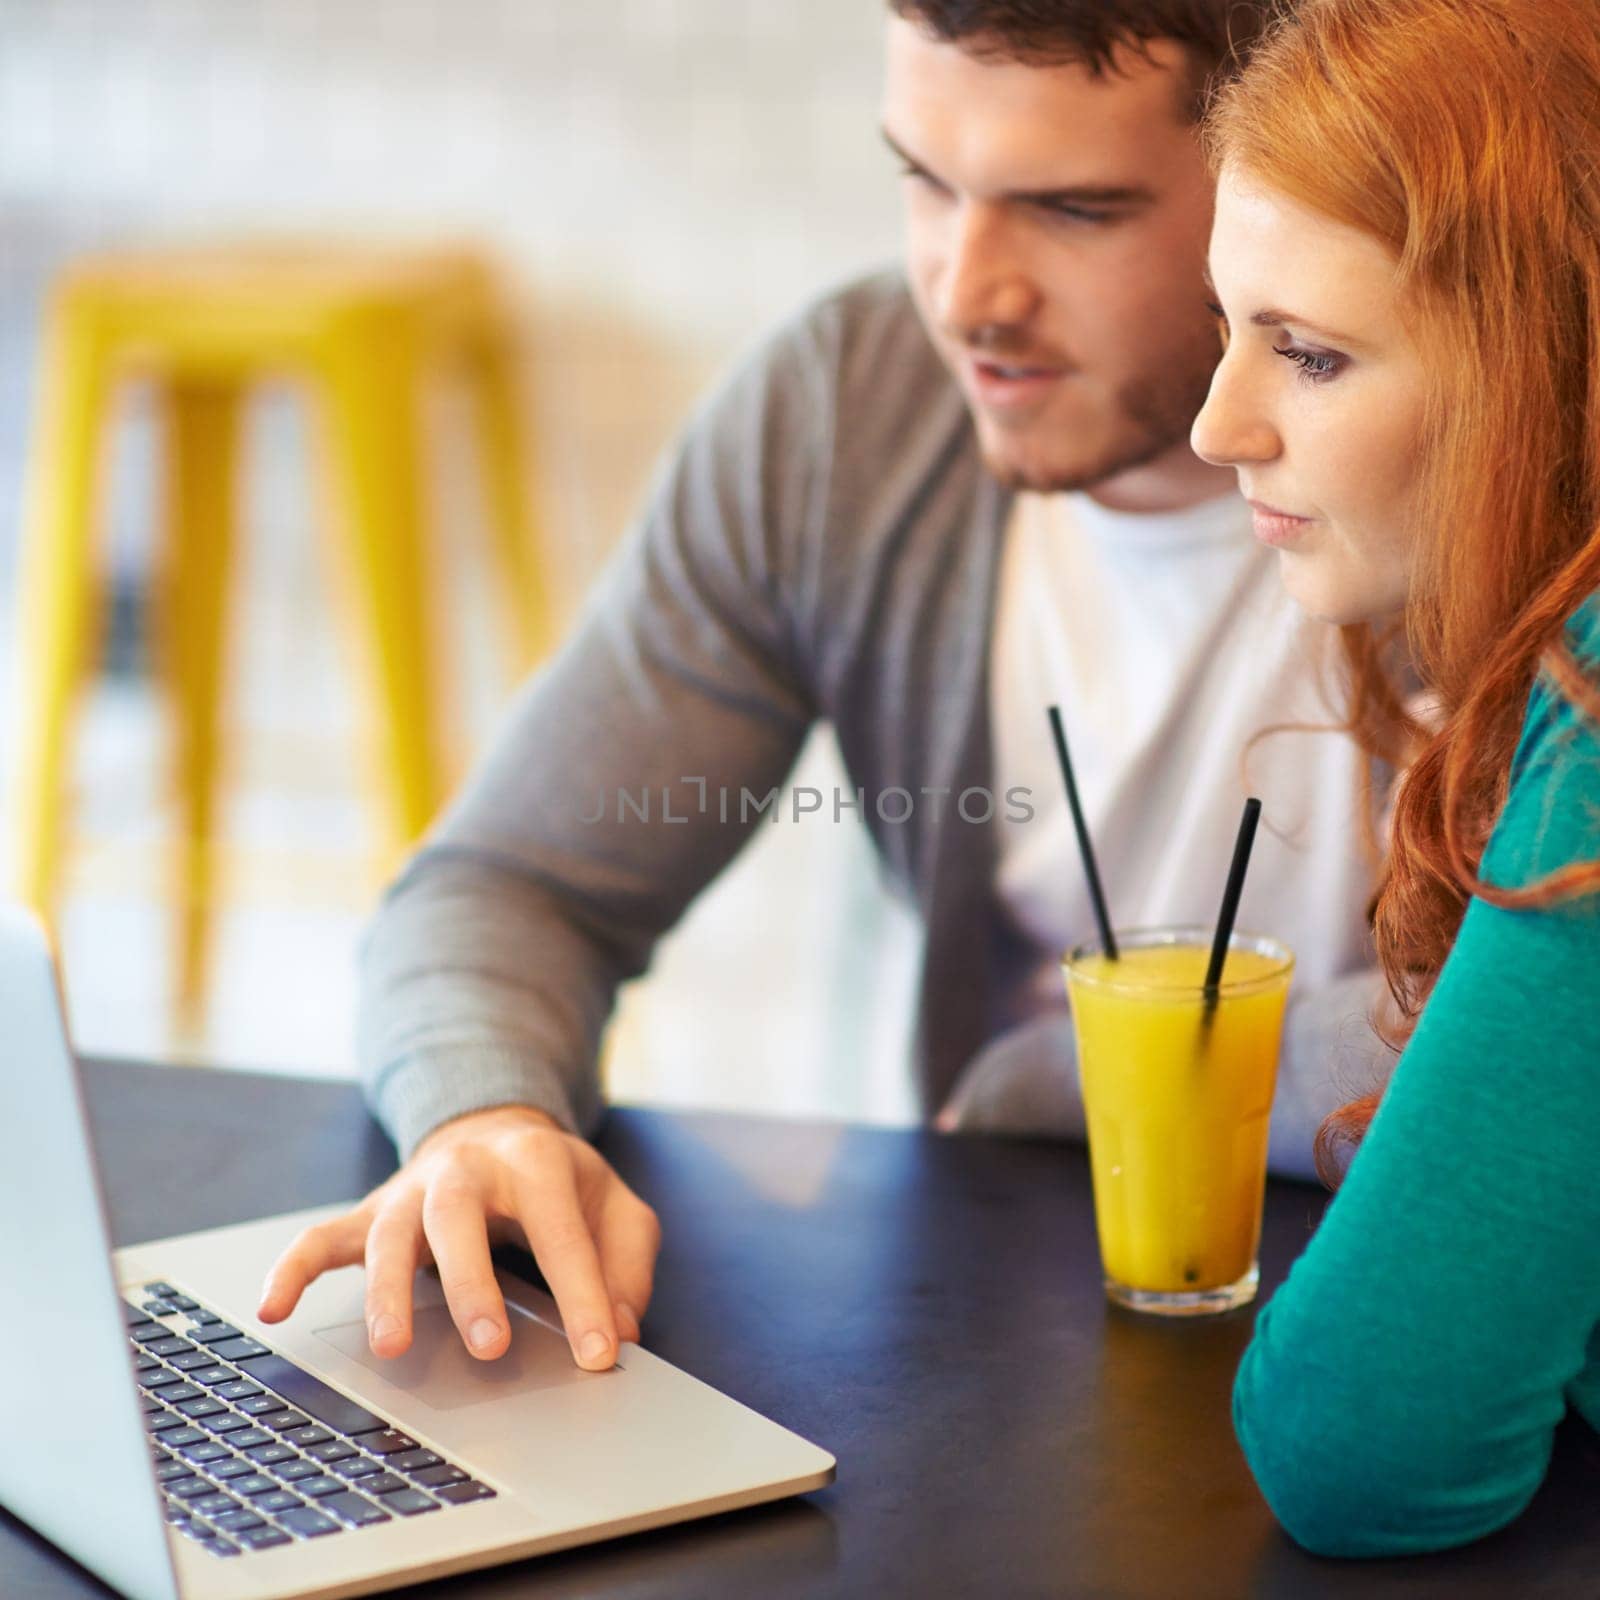 Couple, man and woman with laptop in cafe with connectivity, internet and drink juice together. People, dating and busy in restaurant with beverage, computer and online with technology for project.